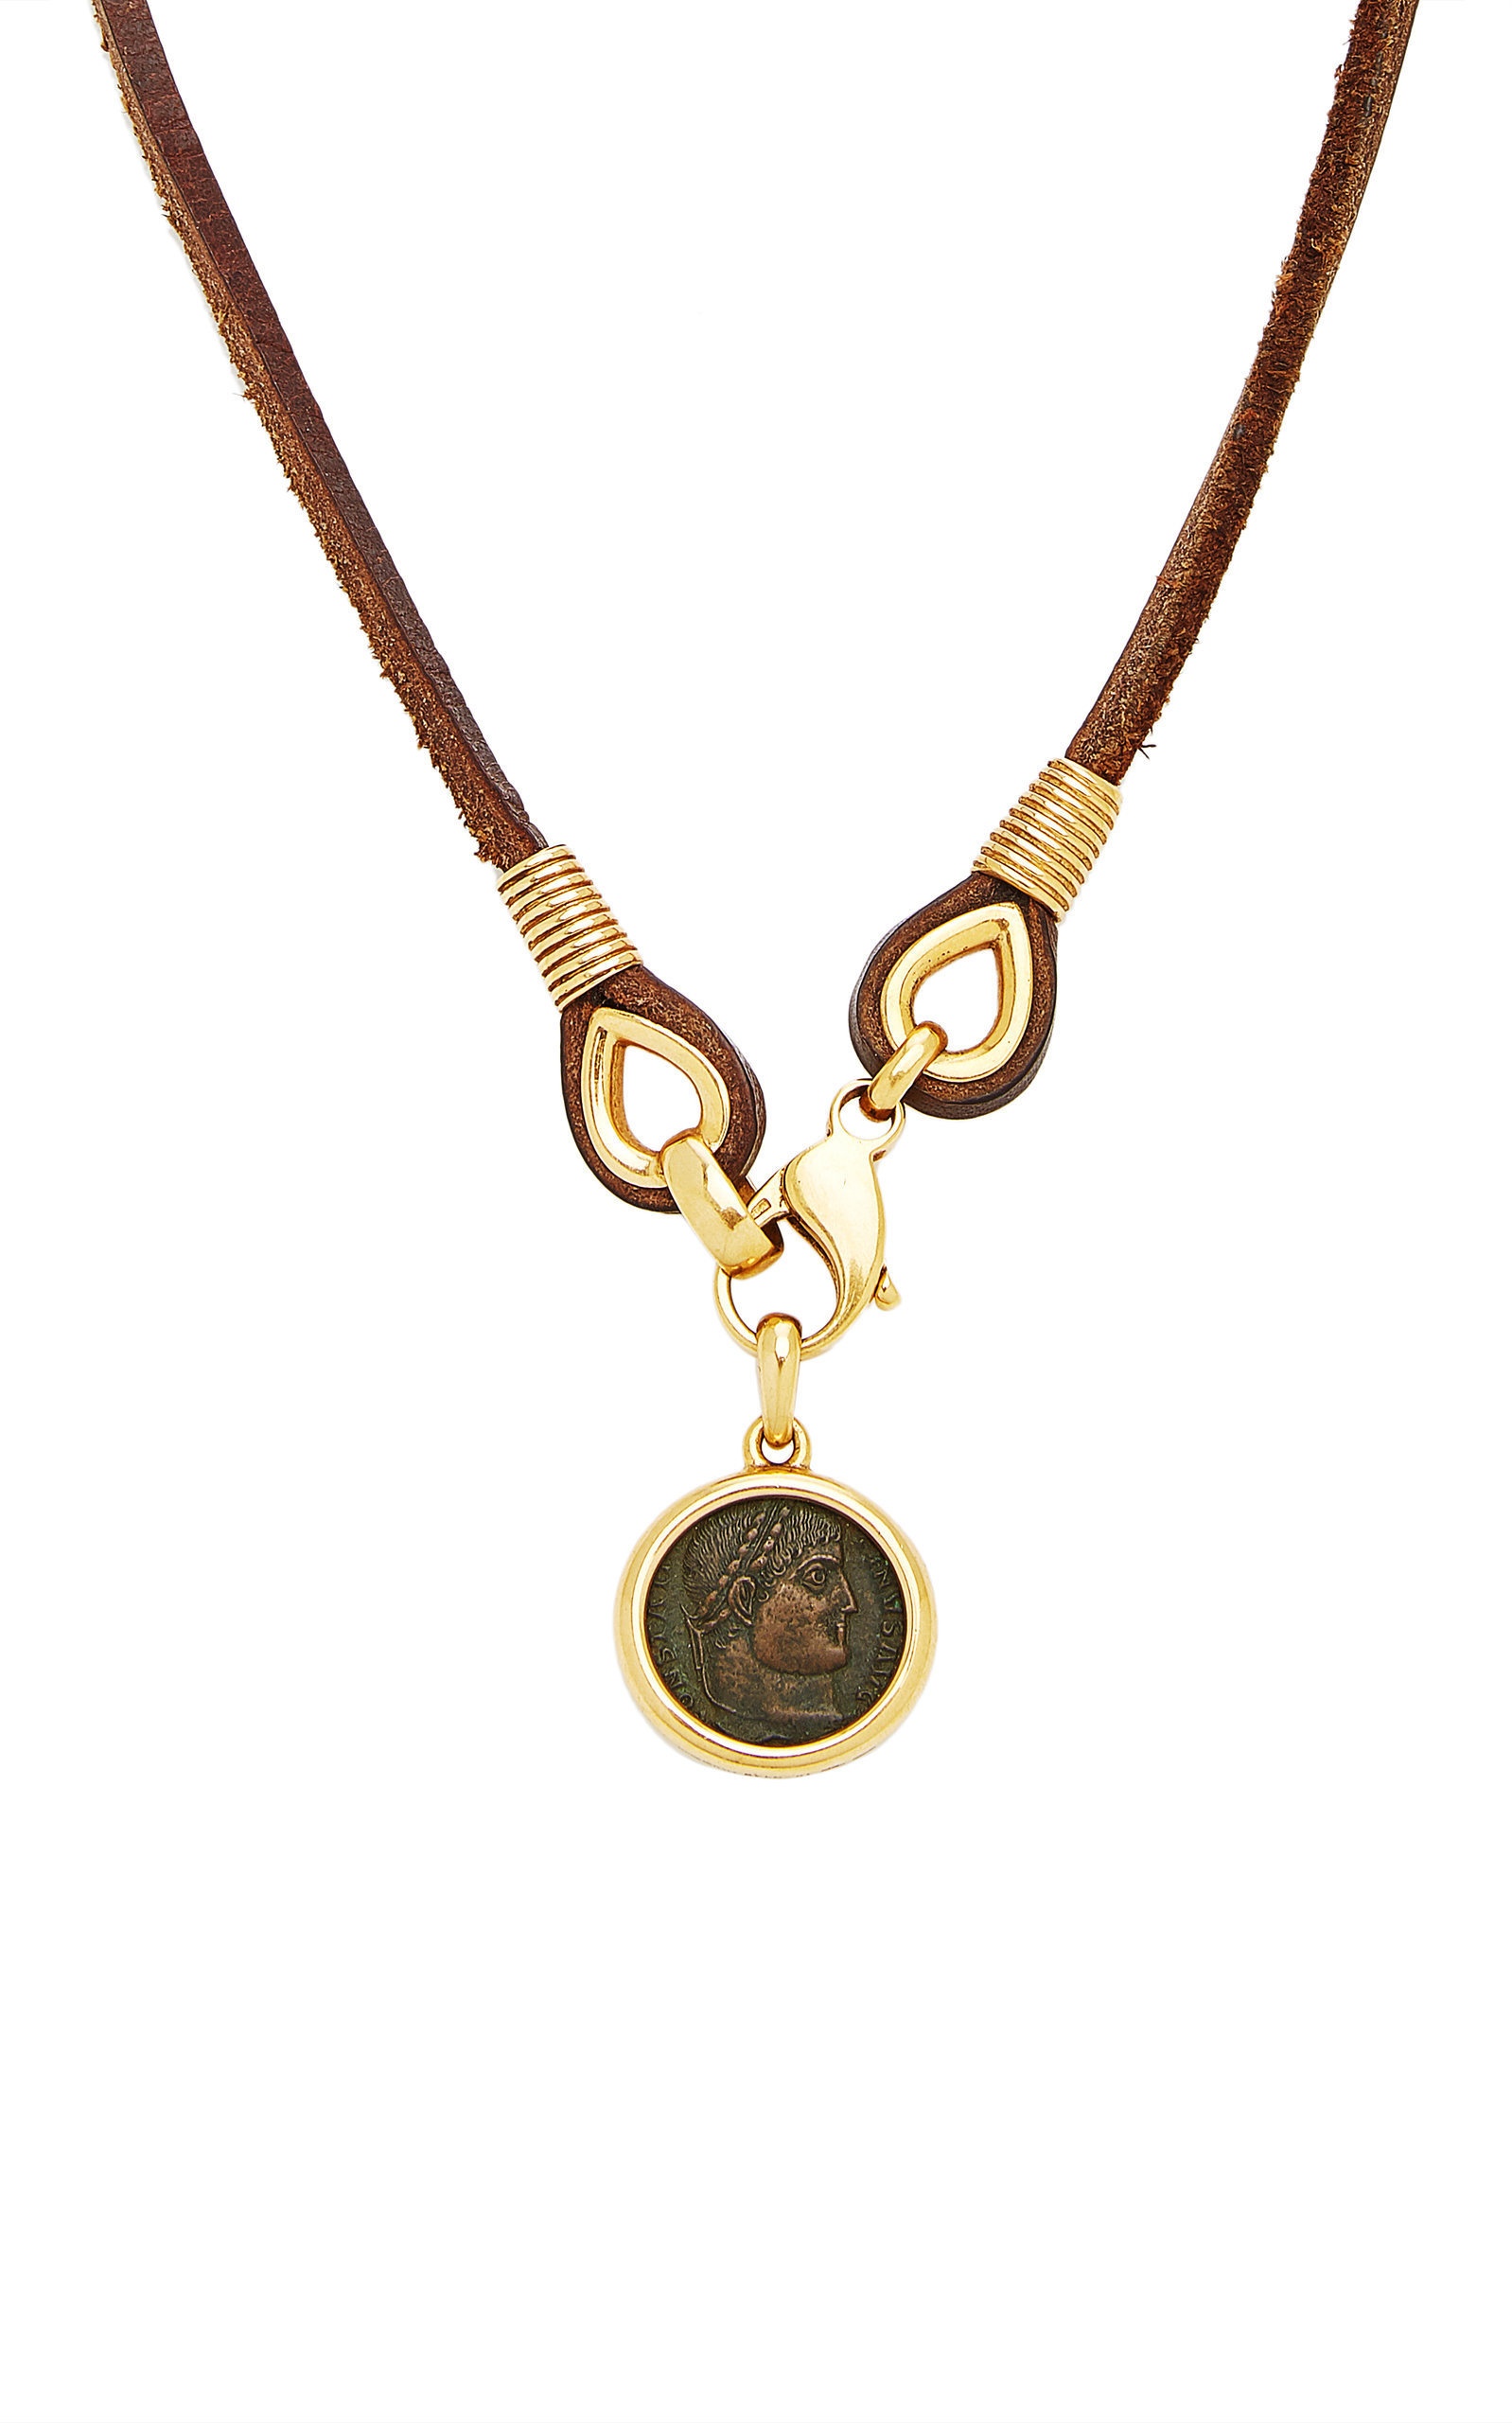 Bulgari | Gold and Antique Coin 'Monete' Necklace | Fine Jewels | 2020 |  Sotheby's